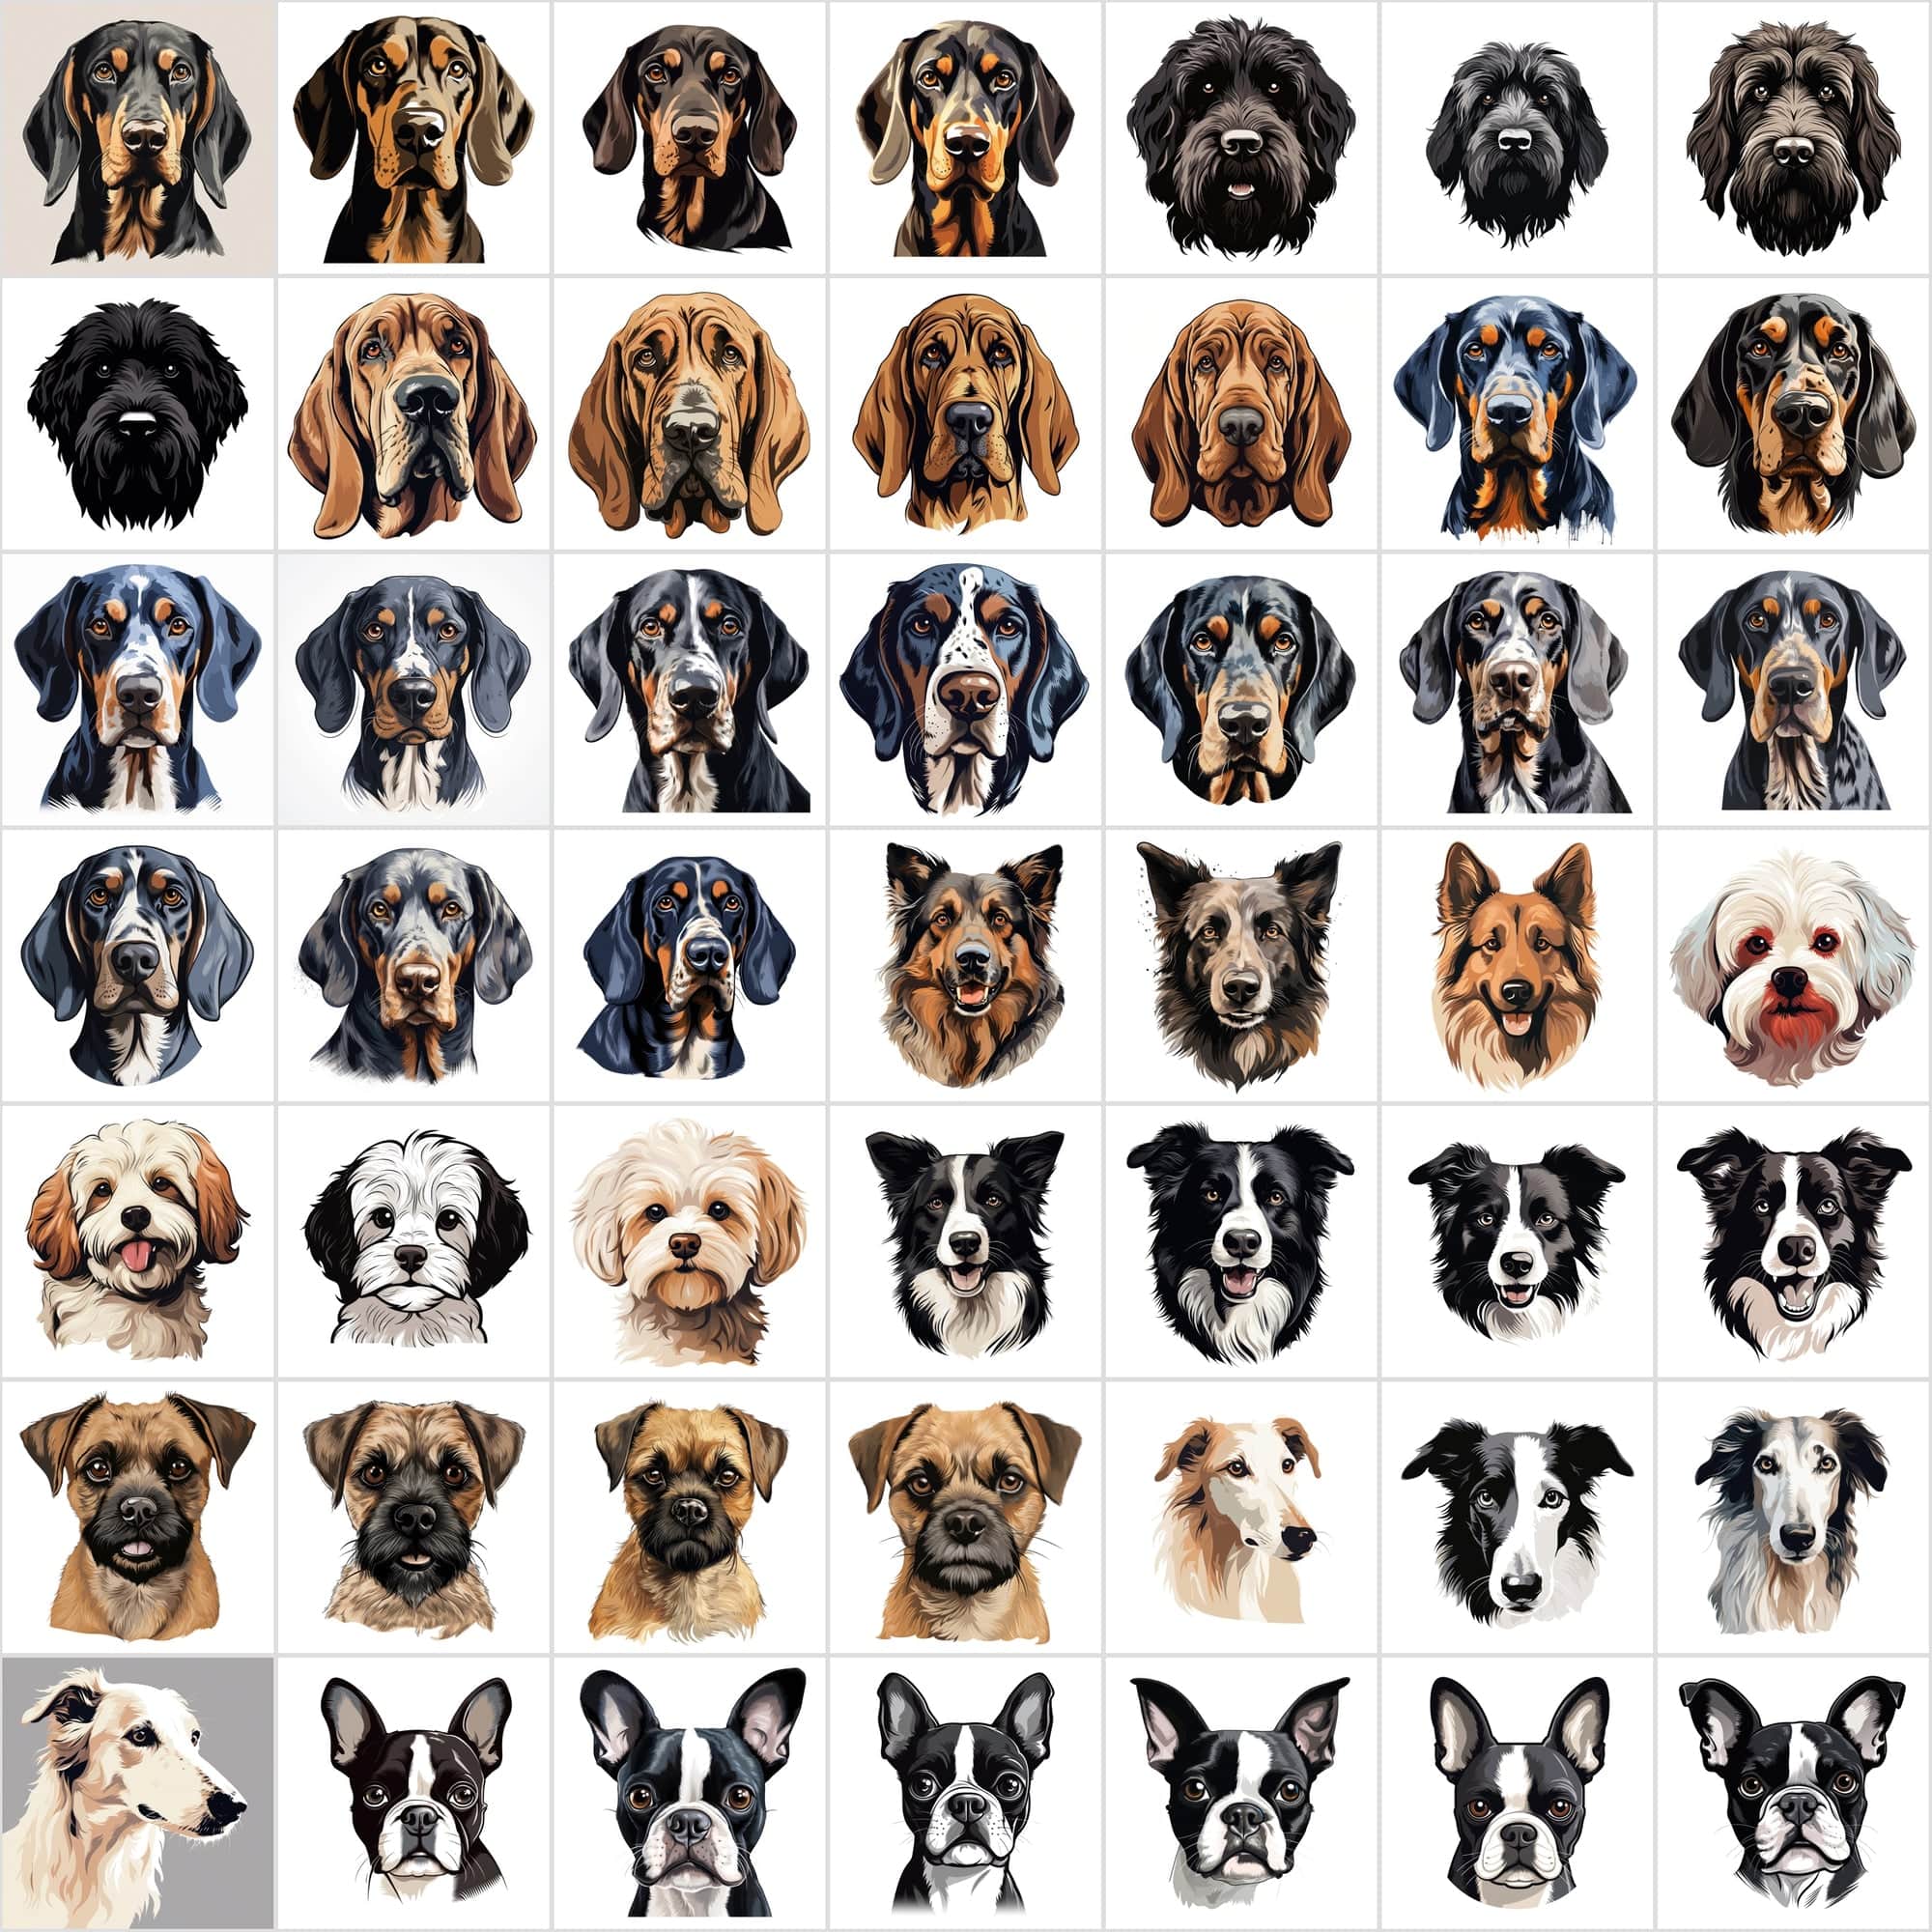 1180 Premium Dog Breed Images: High-Resolution, Transparent & White Background, Commercial License - Perfect for Designers & Pet Enthusiasts Digital Download Sumobundle